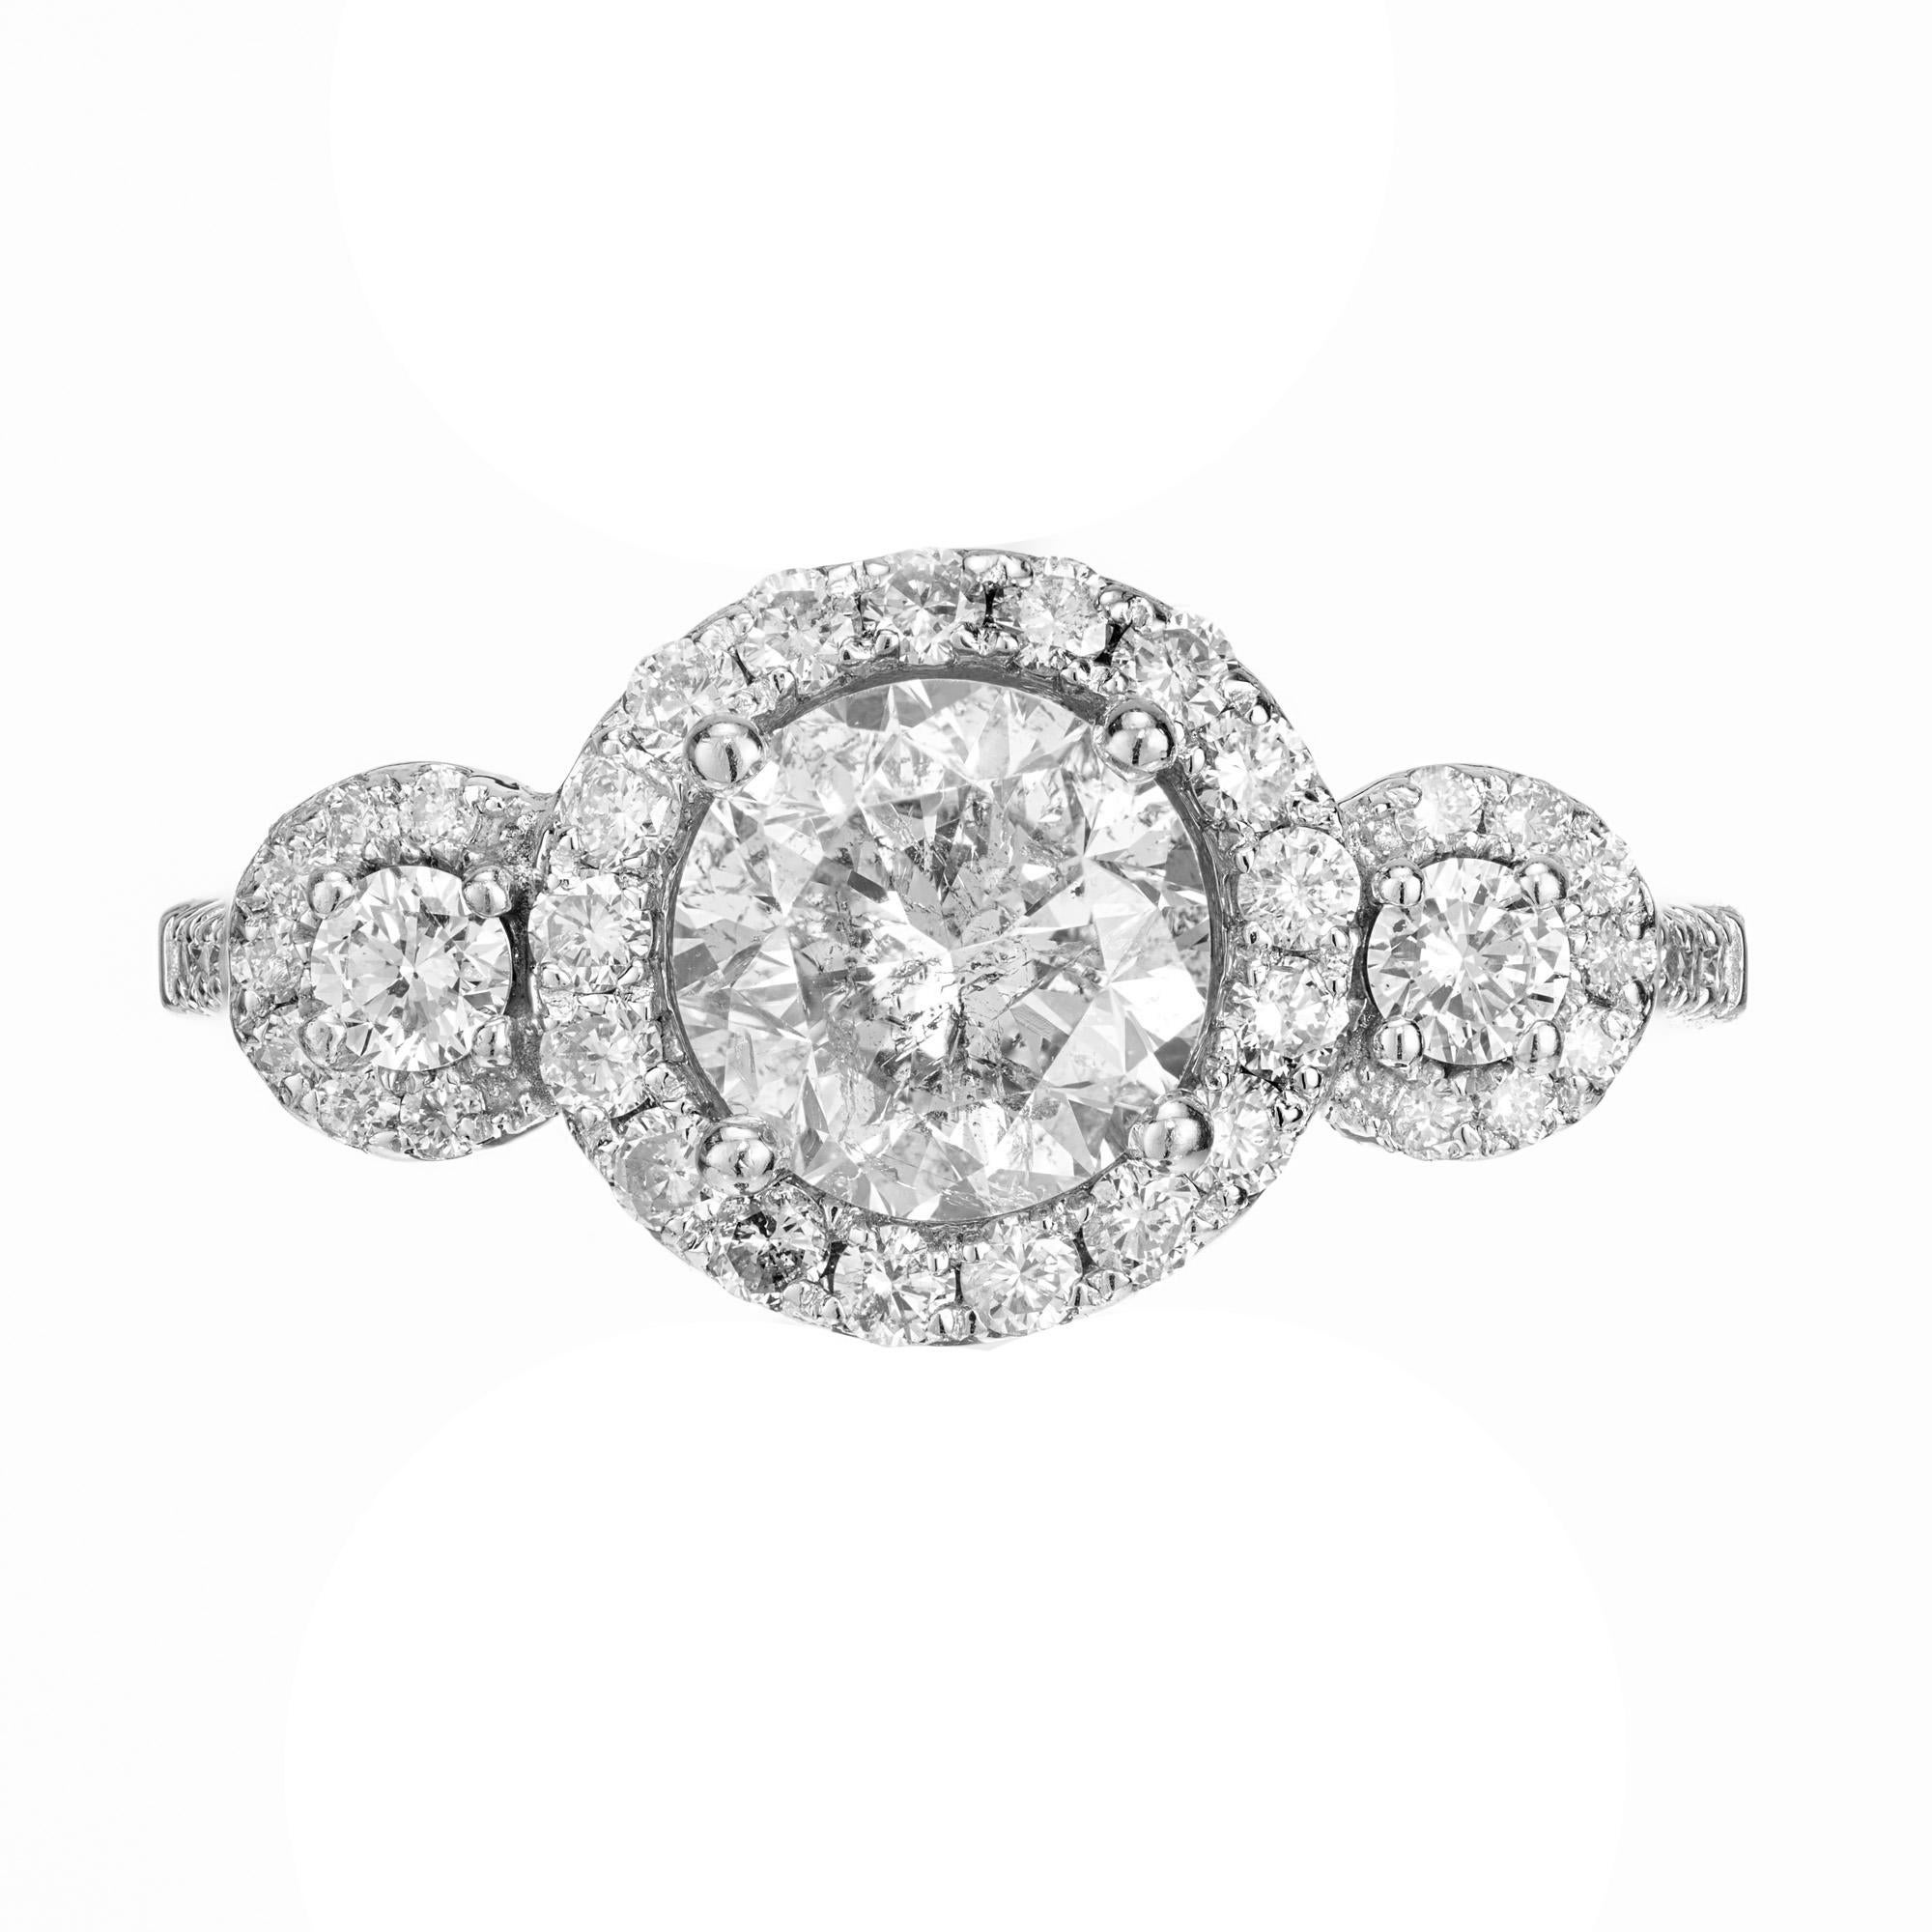 3 stone Halo design diamond engagement ring. EGL certified 1.57ct round center diamond set in a 14k white gold mounting, accented with 2 round cut side diamonds. Each stone has a halo of round cut diamonds, Each shoulder is enriched with 8 diamonds